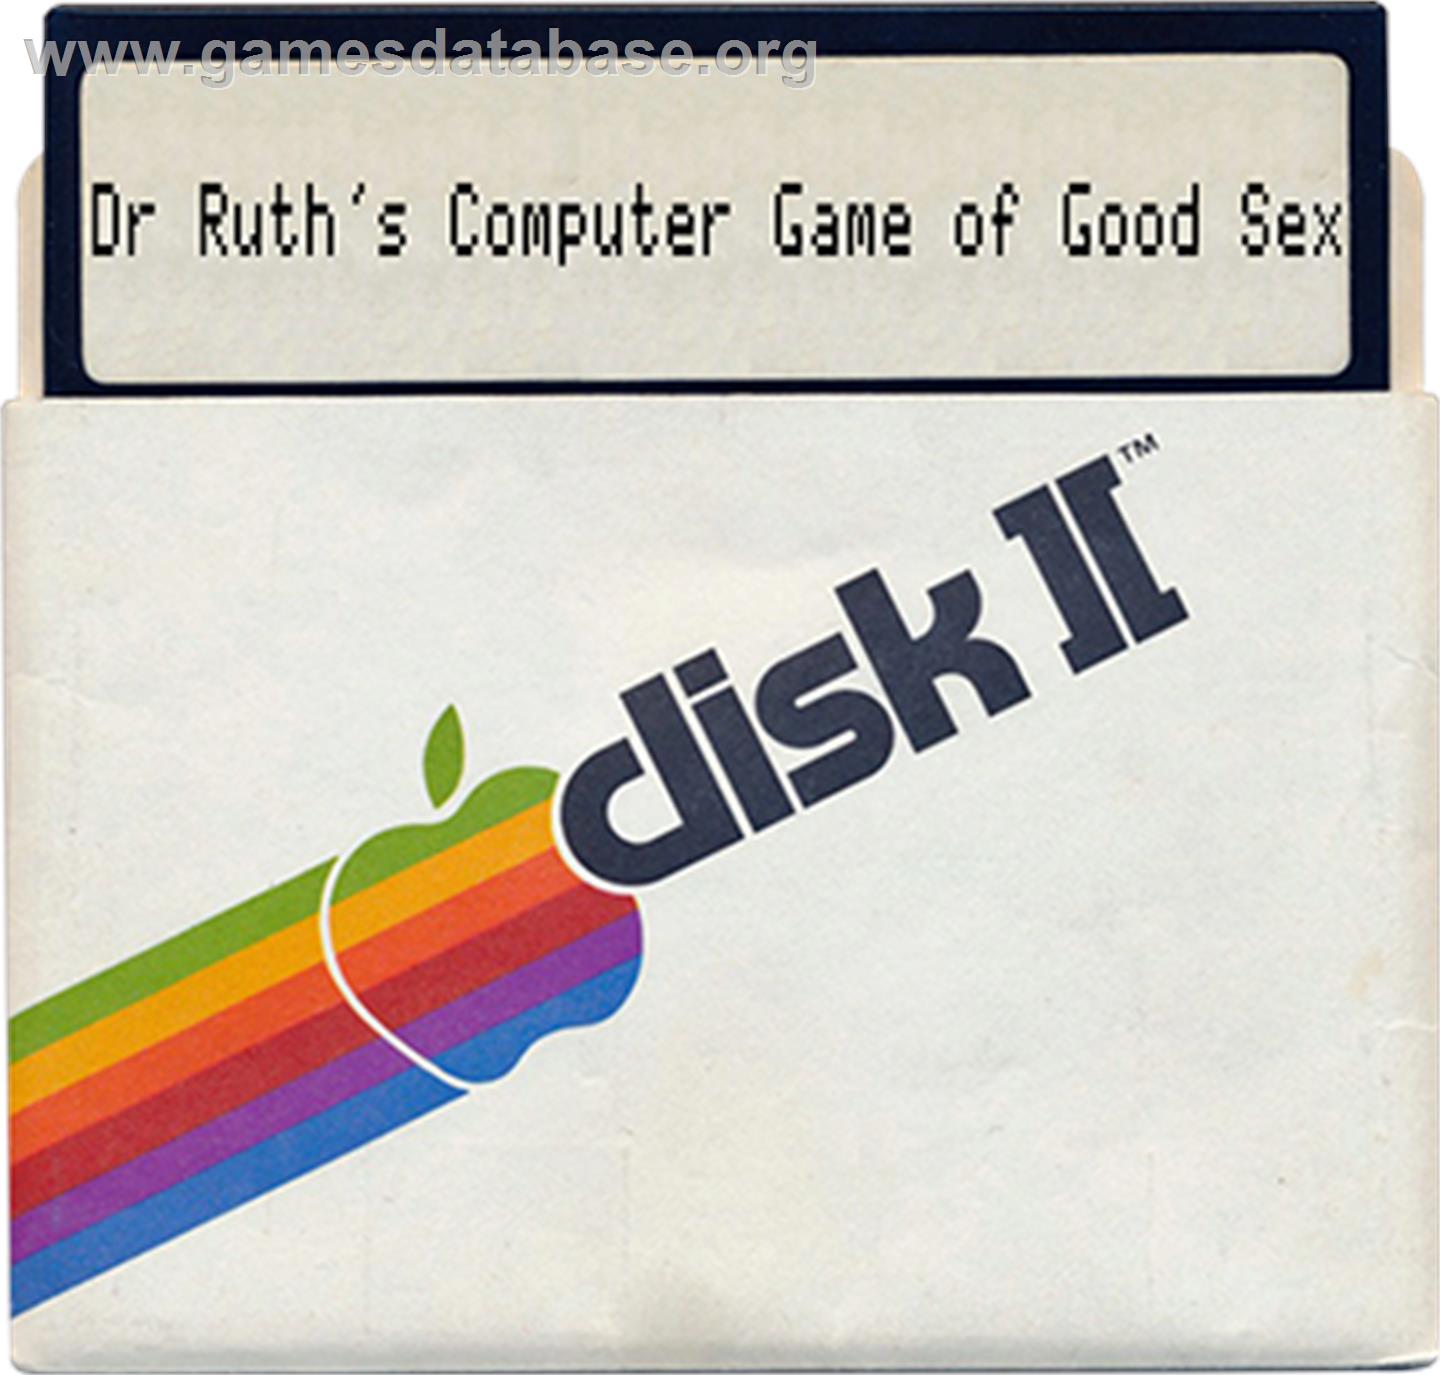 Dr. Ruth's Computer Game of Good Sex - Apple II - Artwork - Disc